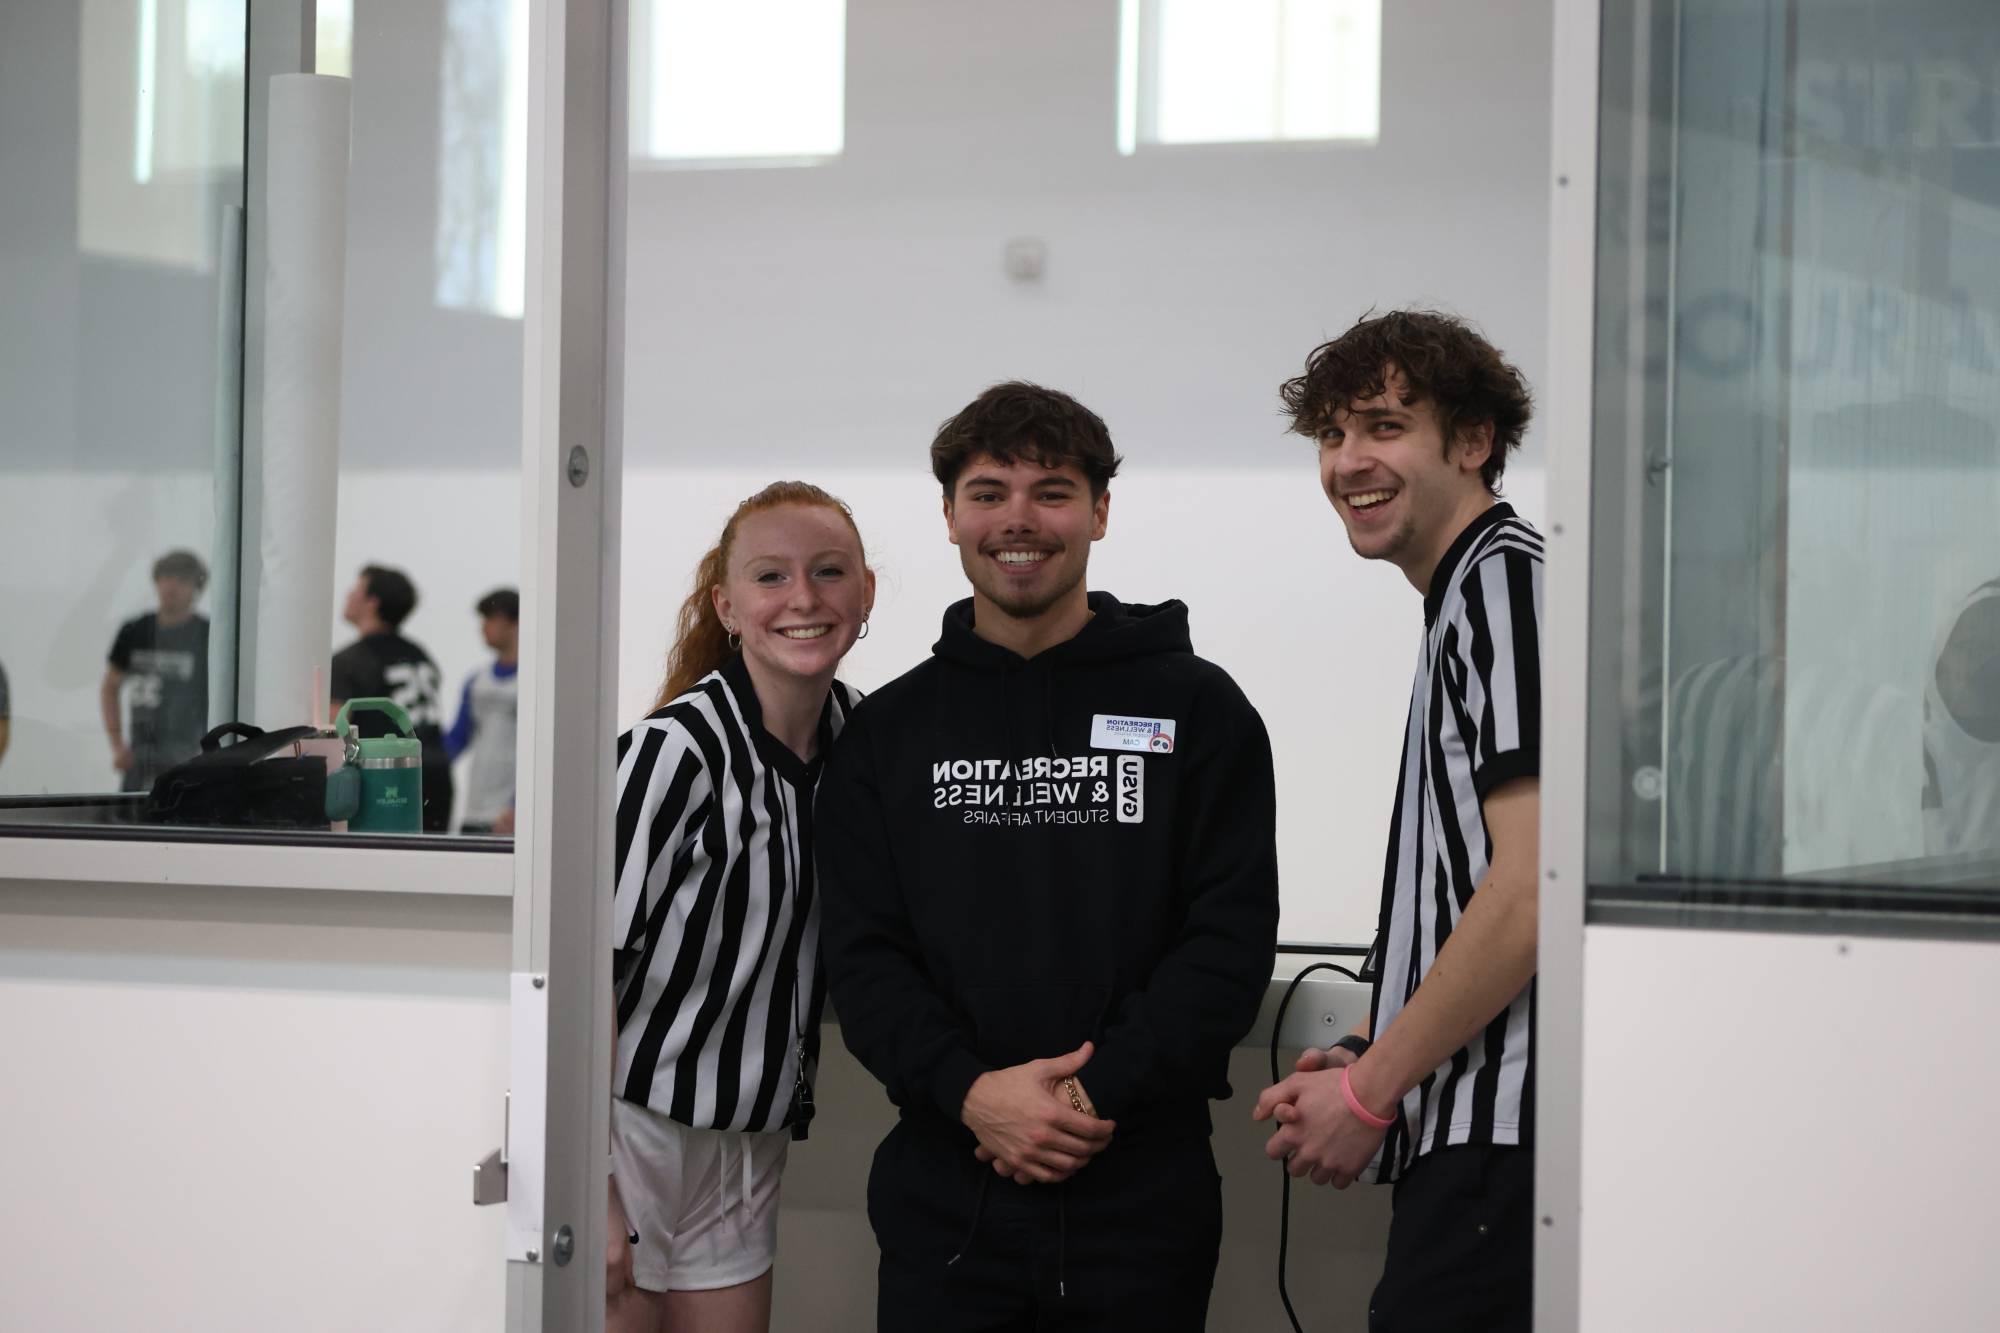 RecWell Student Staff at intramural sports. From left to right: referee, supervisor, referee